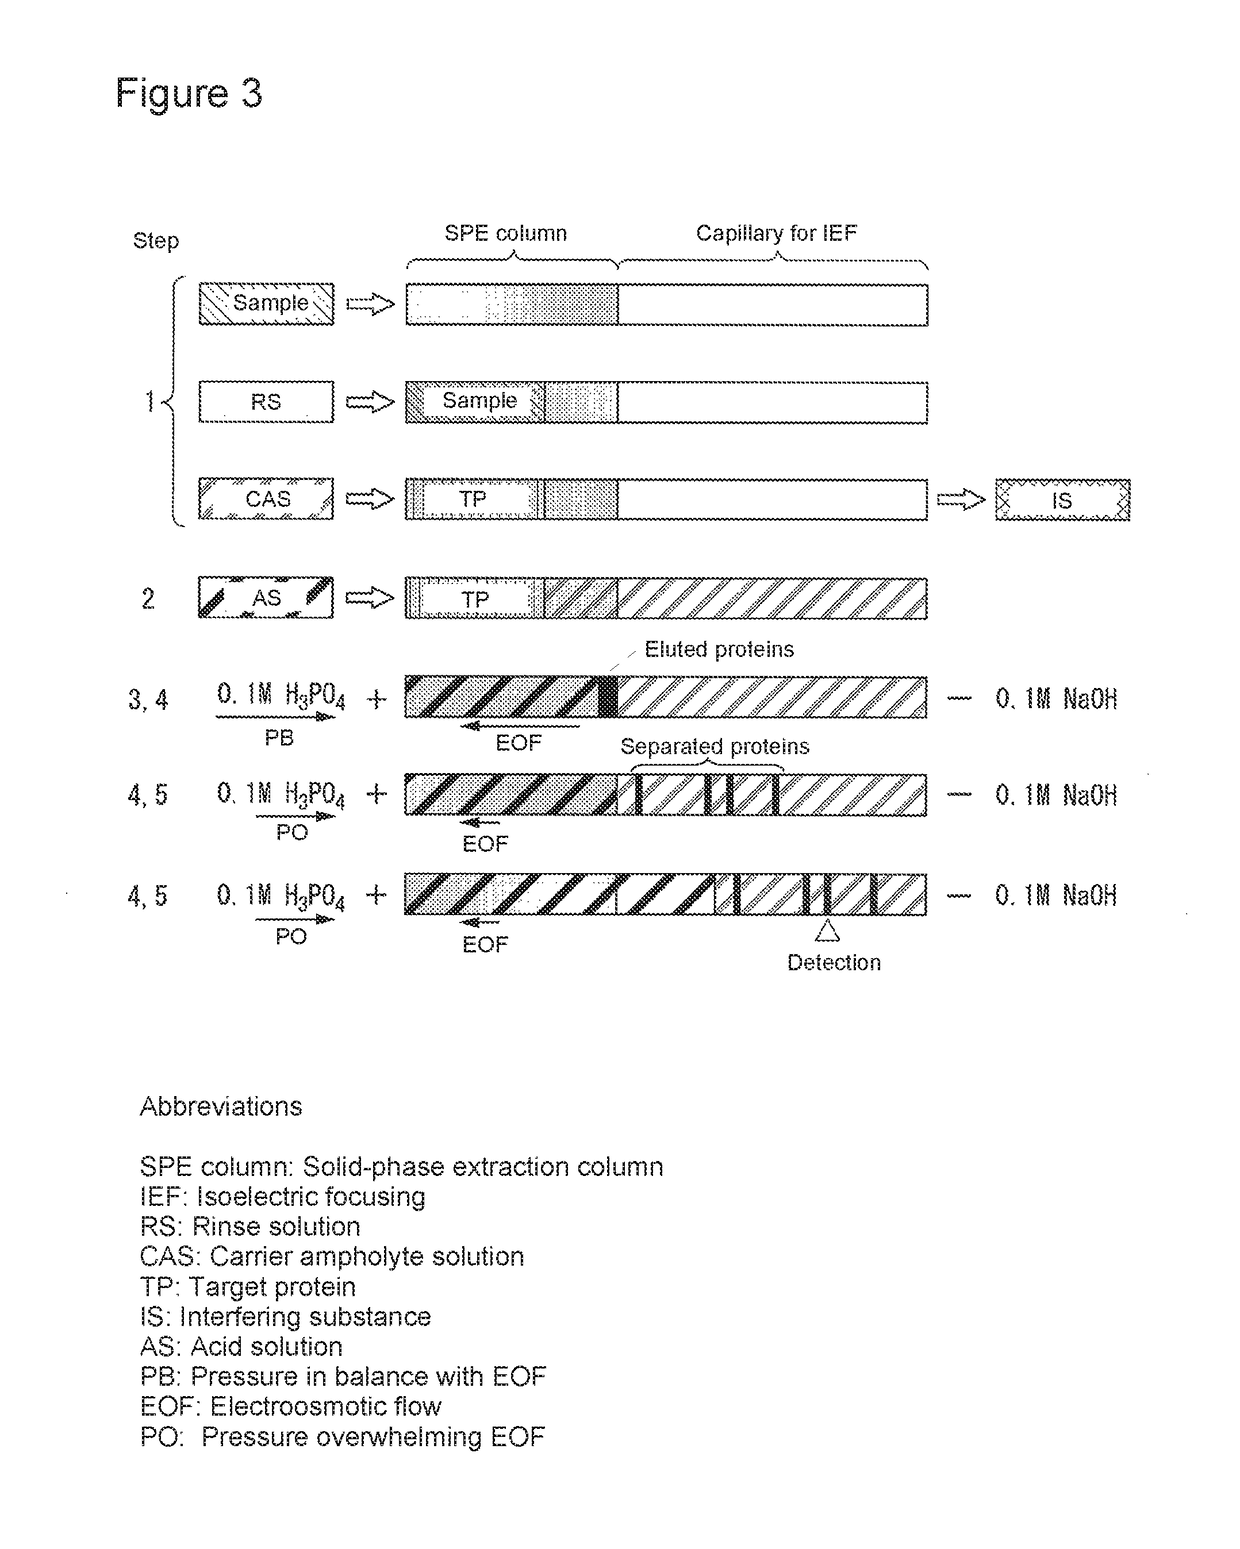 Capillary device for separation and analysis, microfluidic chip for separation and analysis, analysis method for proteins or peptides, electrophoresis instrument, and microfluidic chip electrophoresis instrument for separation and analysis